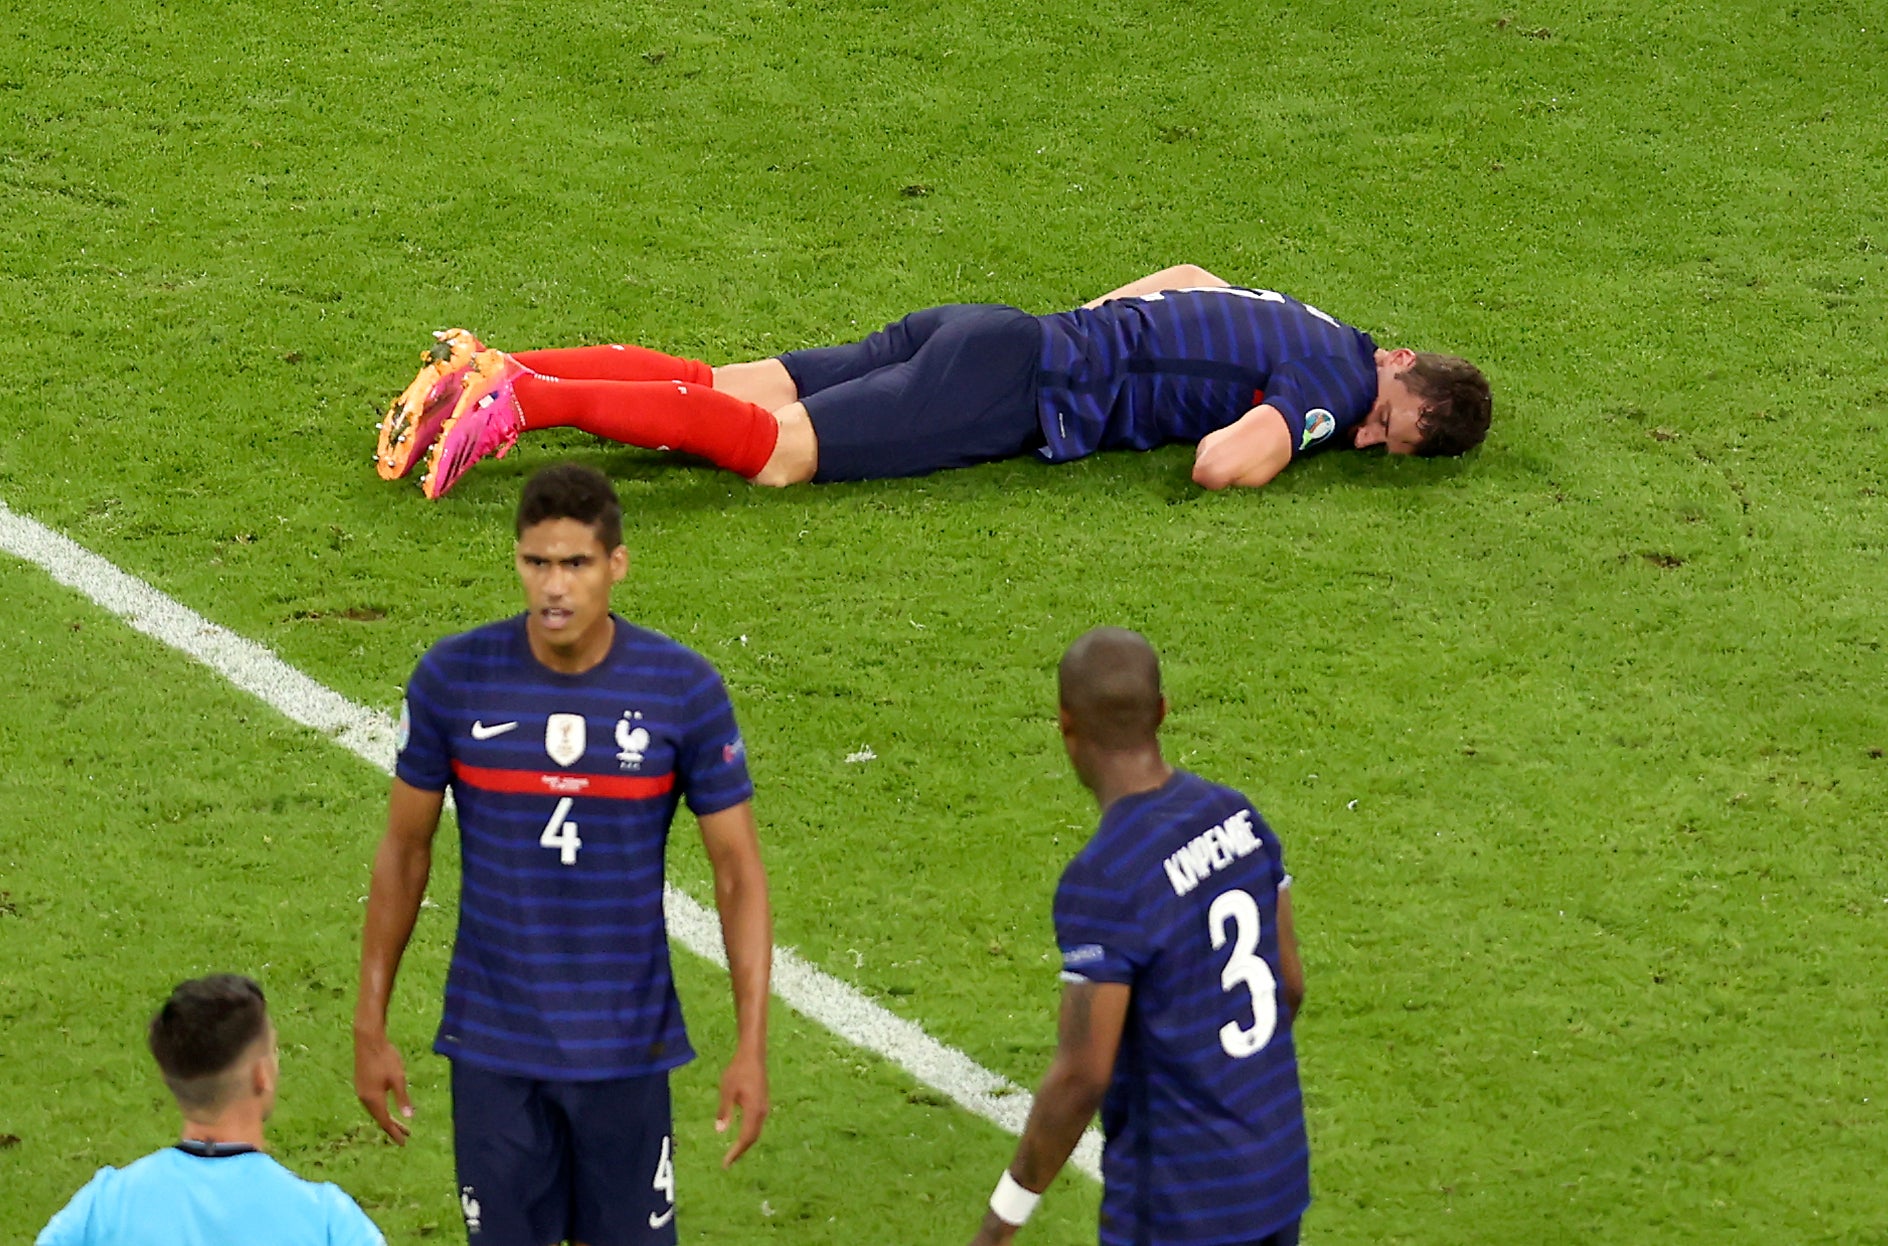 French medical officials say Benjamin Pavard, top, did not lose consciousness or suffer a concussion after his collision with Germany's Robin Gosens on Tuesday